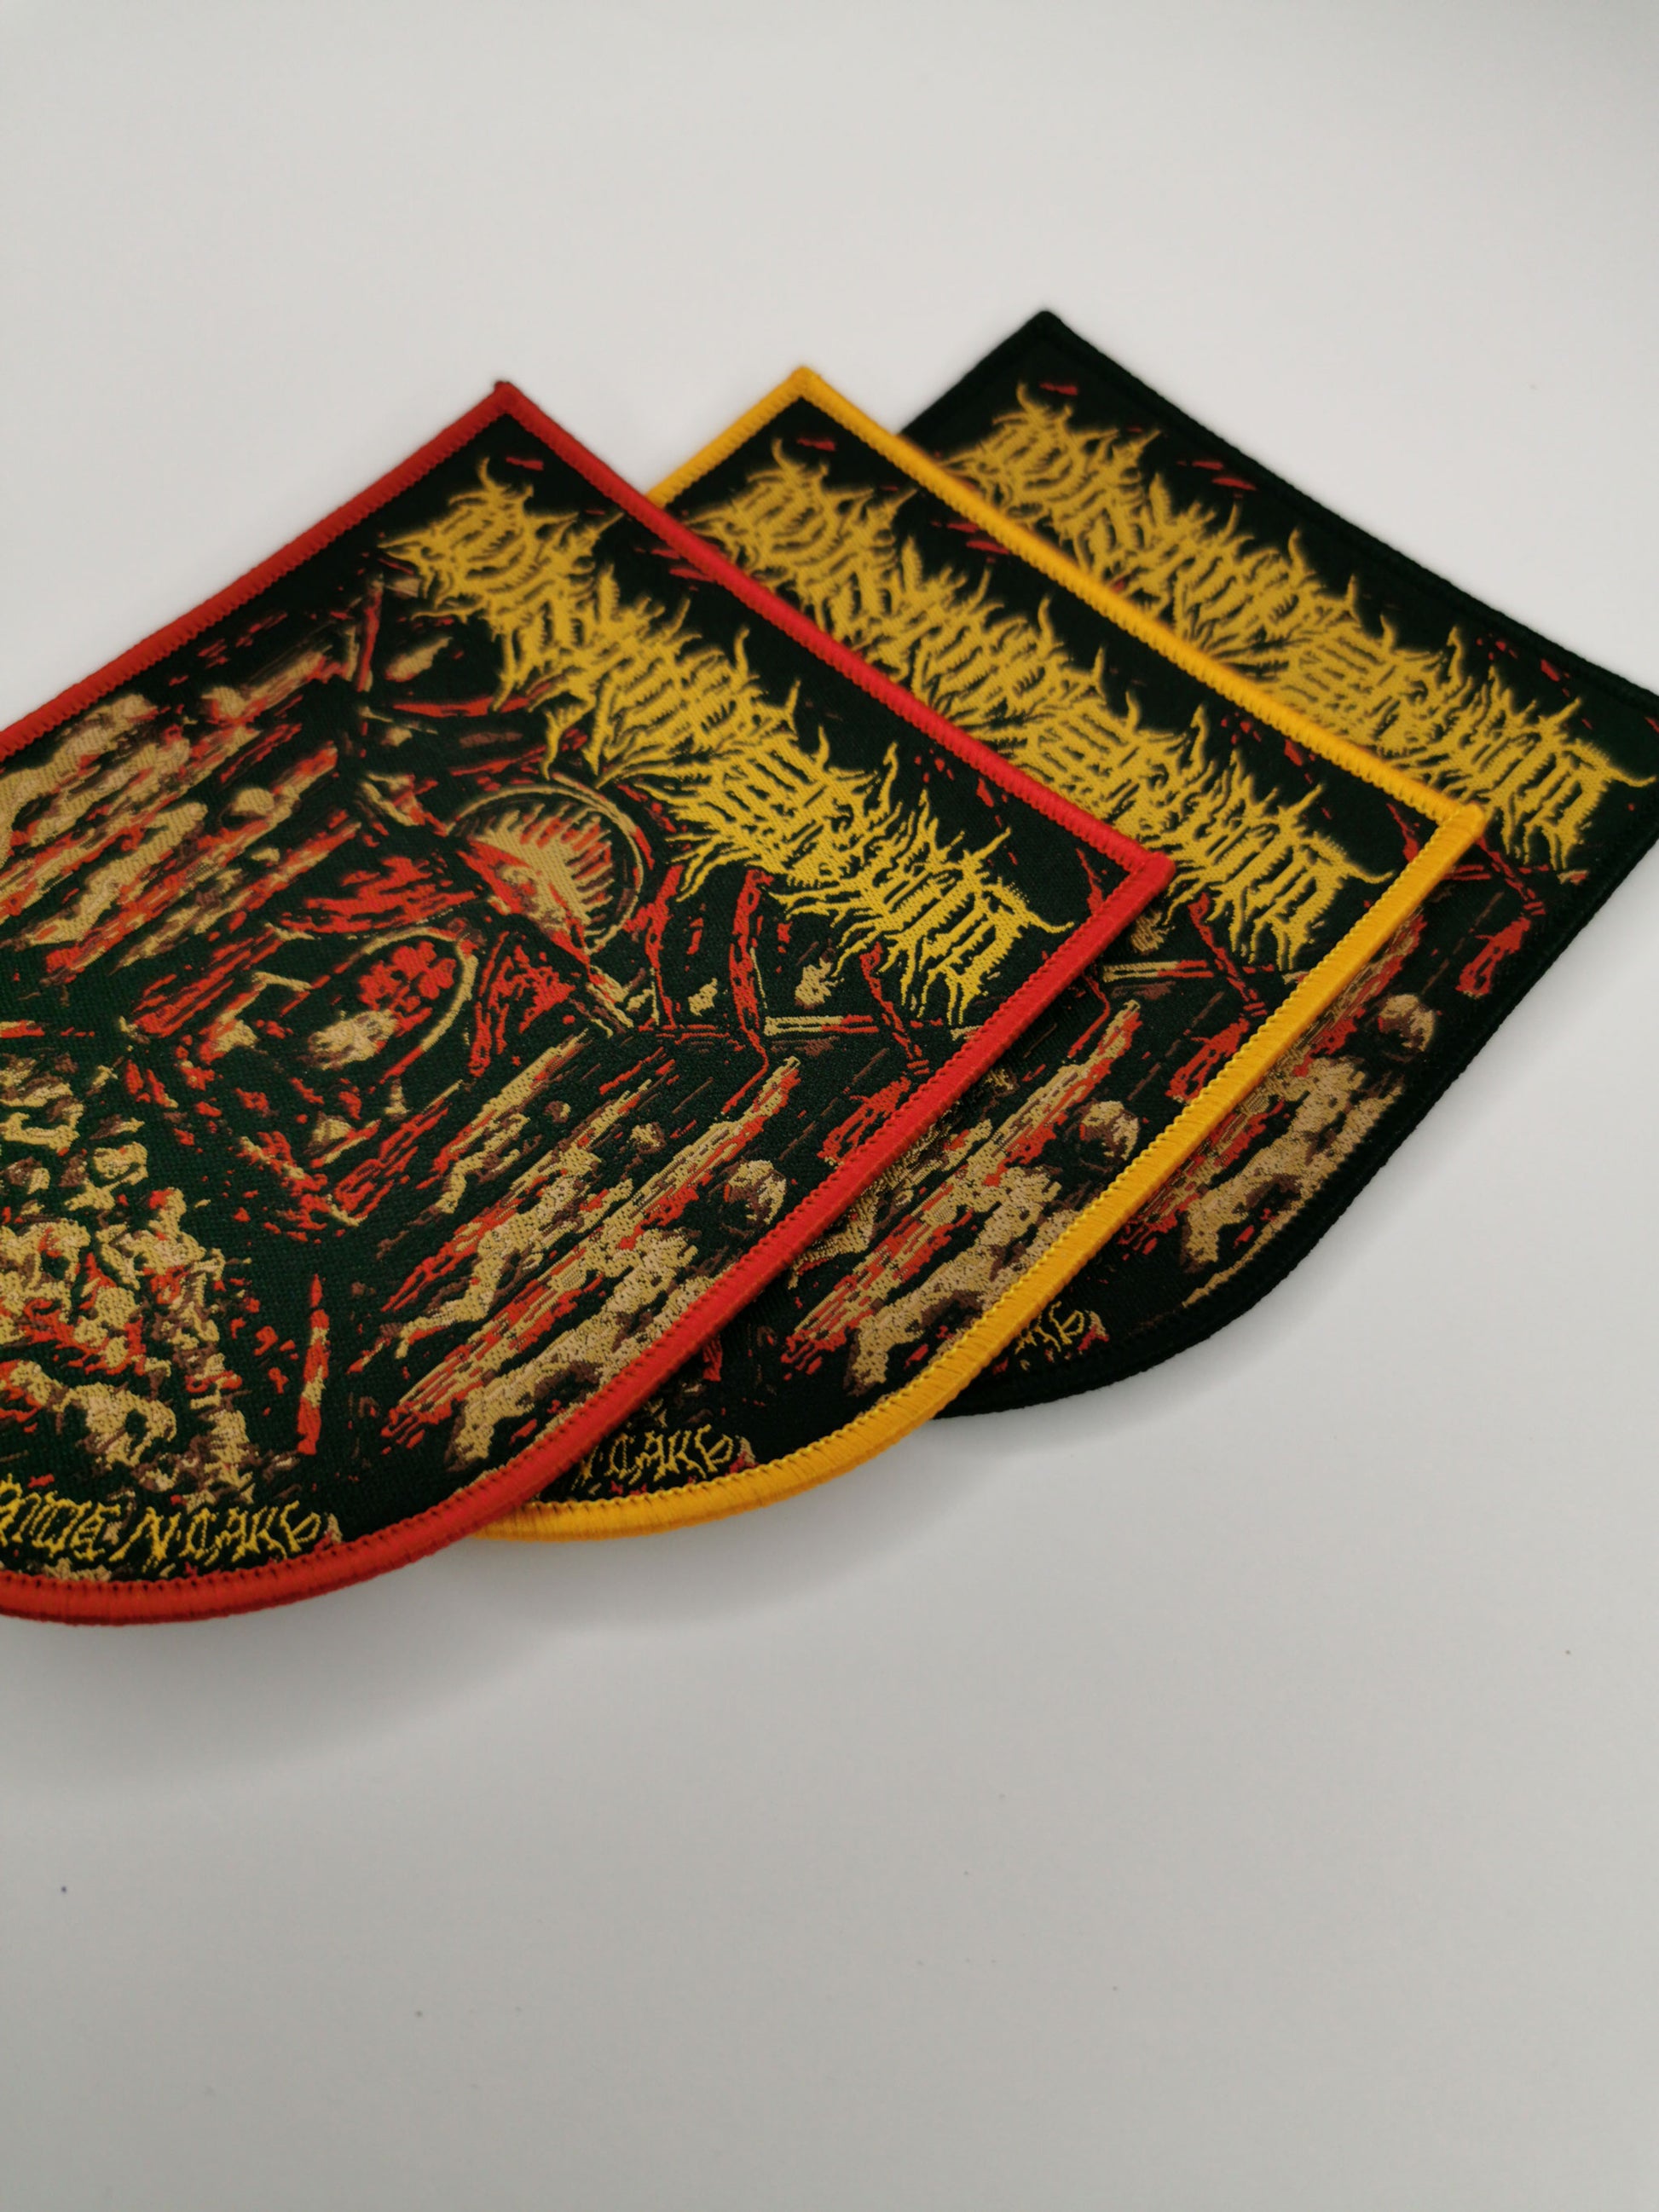 Temporal Dimensions Patches Disimperium Grand Insurgence upon Despotic Altars Metal Woven Patches